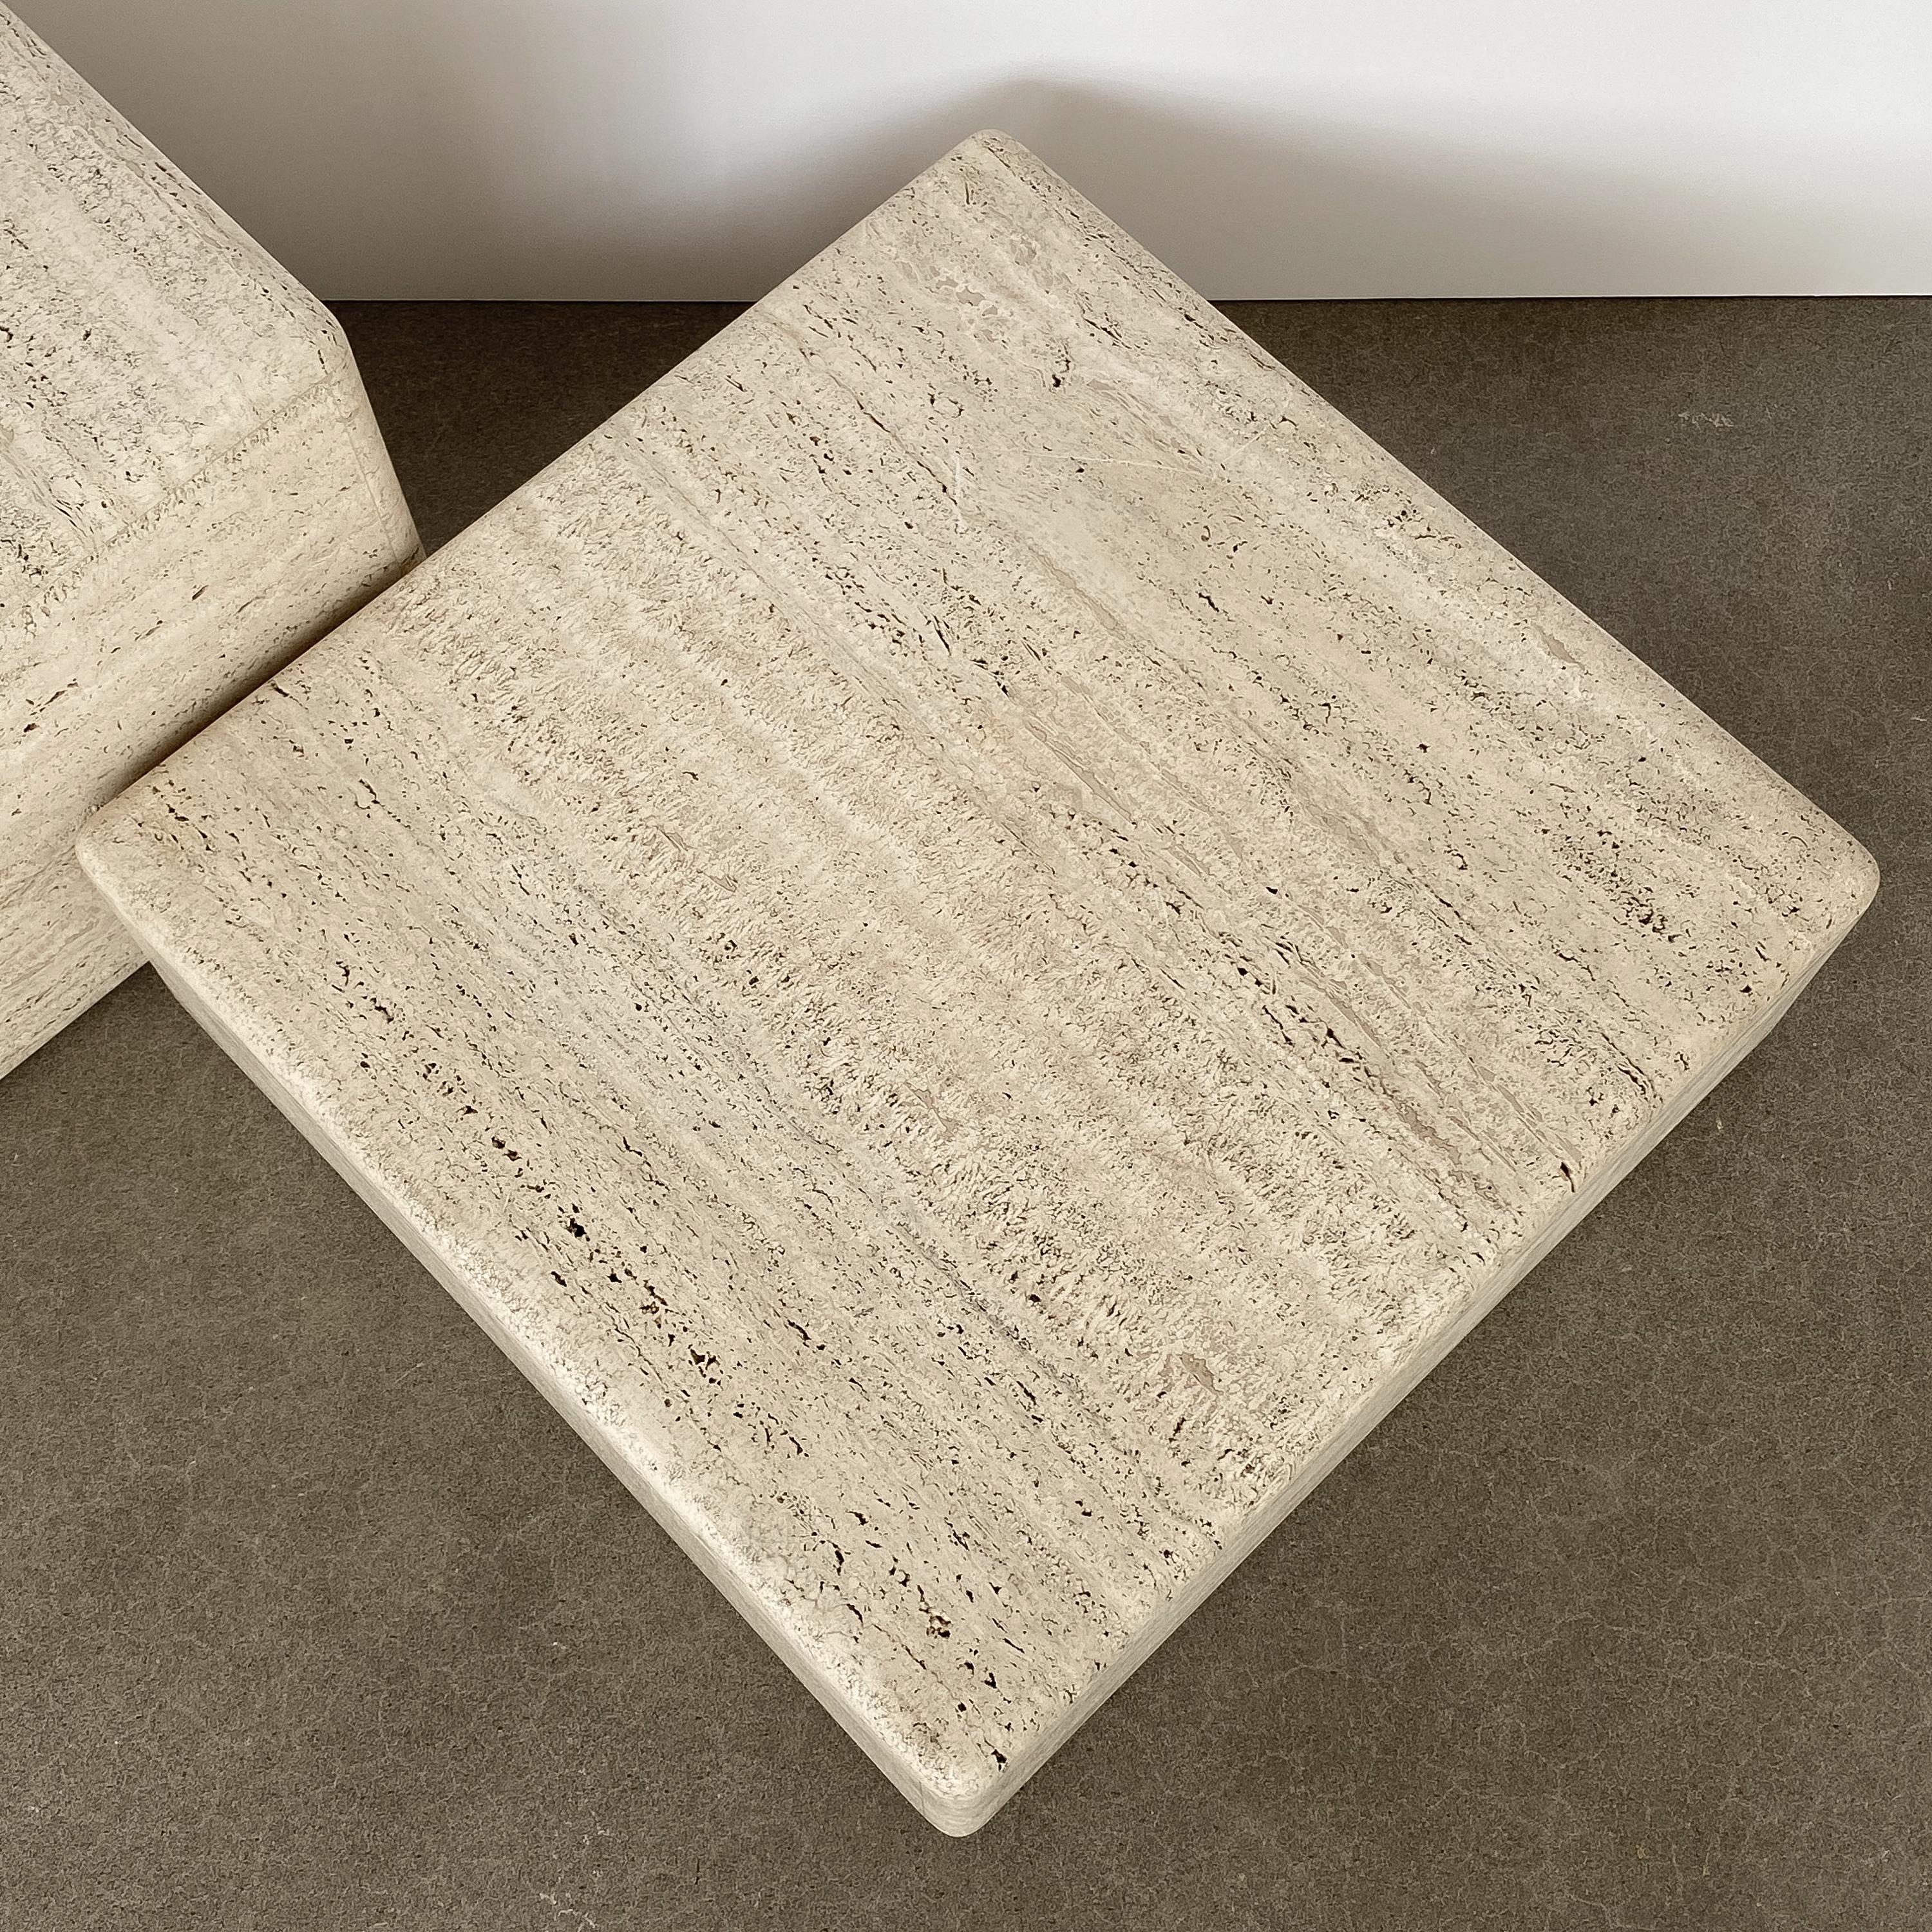 Two-Piece Travertine Cube Tiered Coffee Table 6